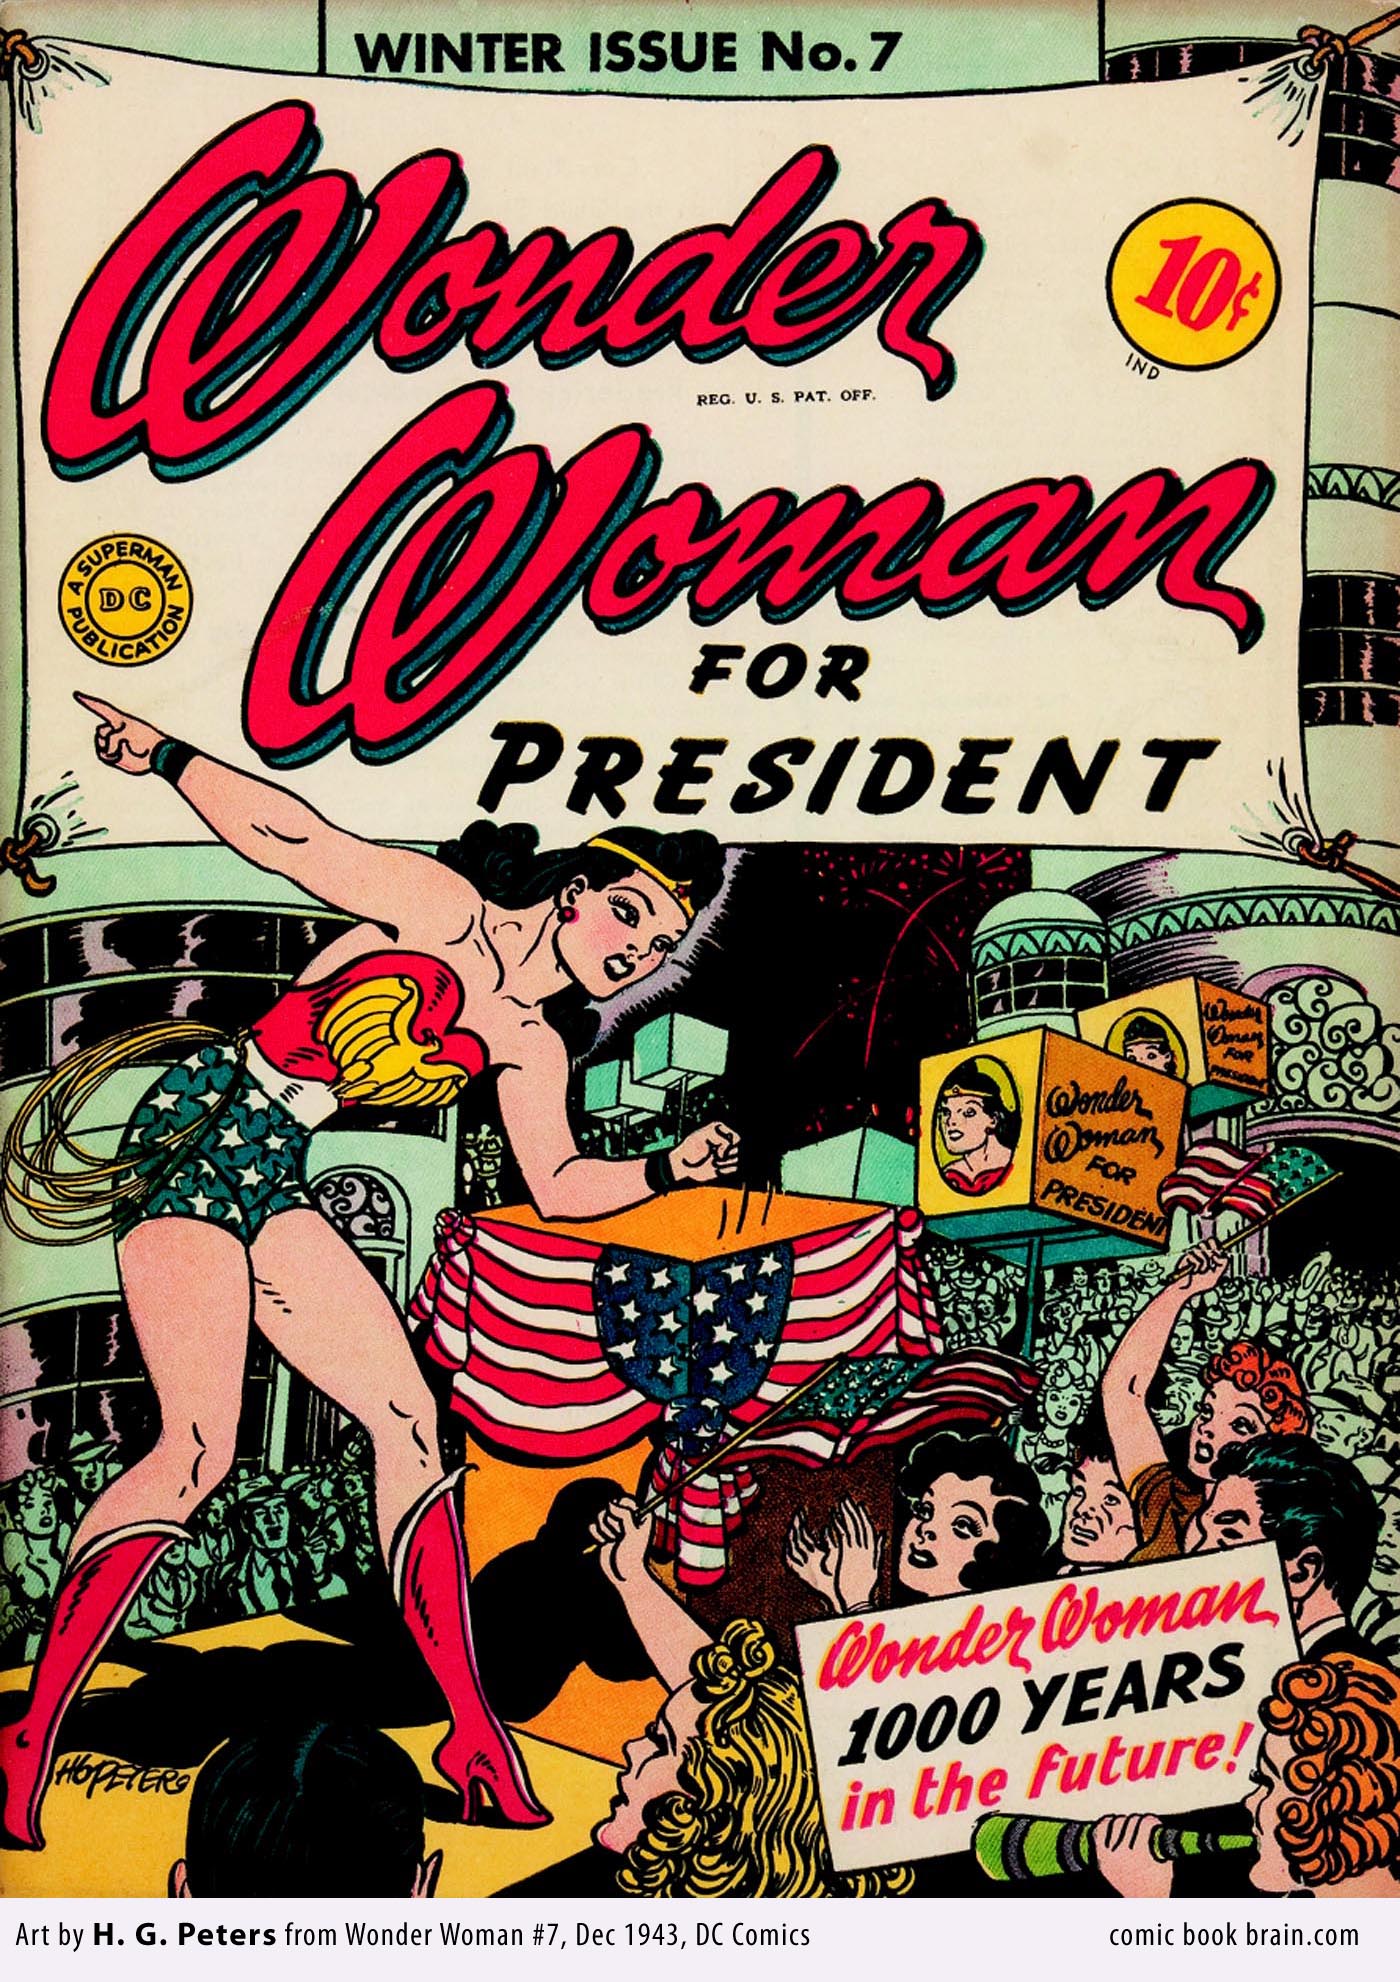 11 Superheroes and Villains Who Held Political Office